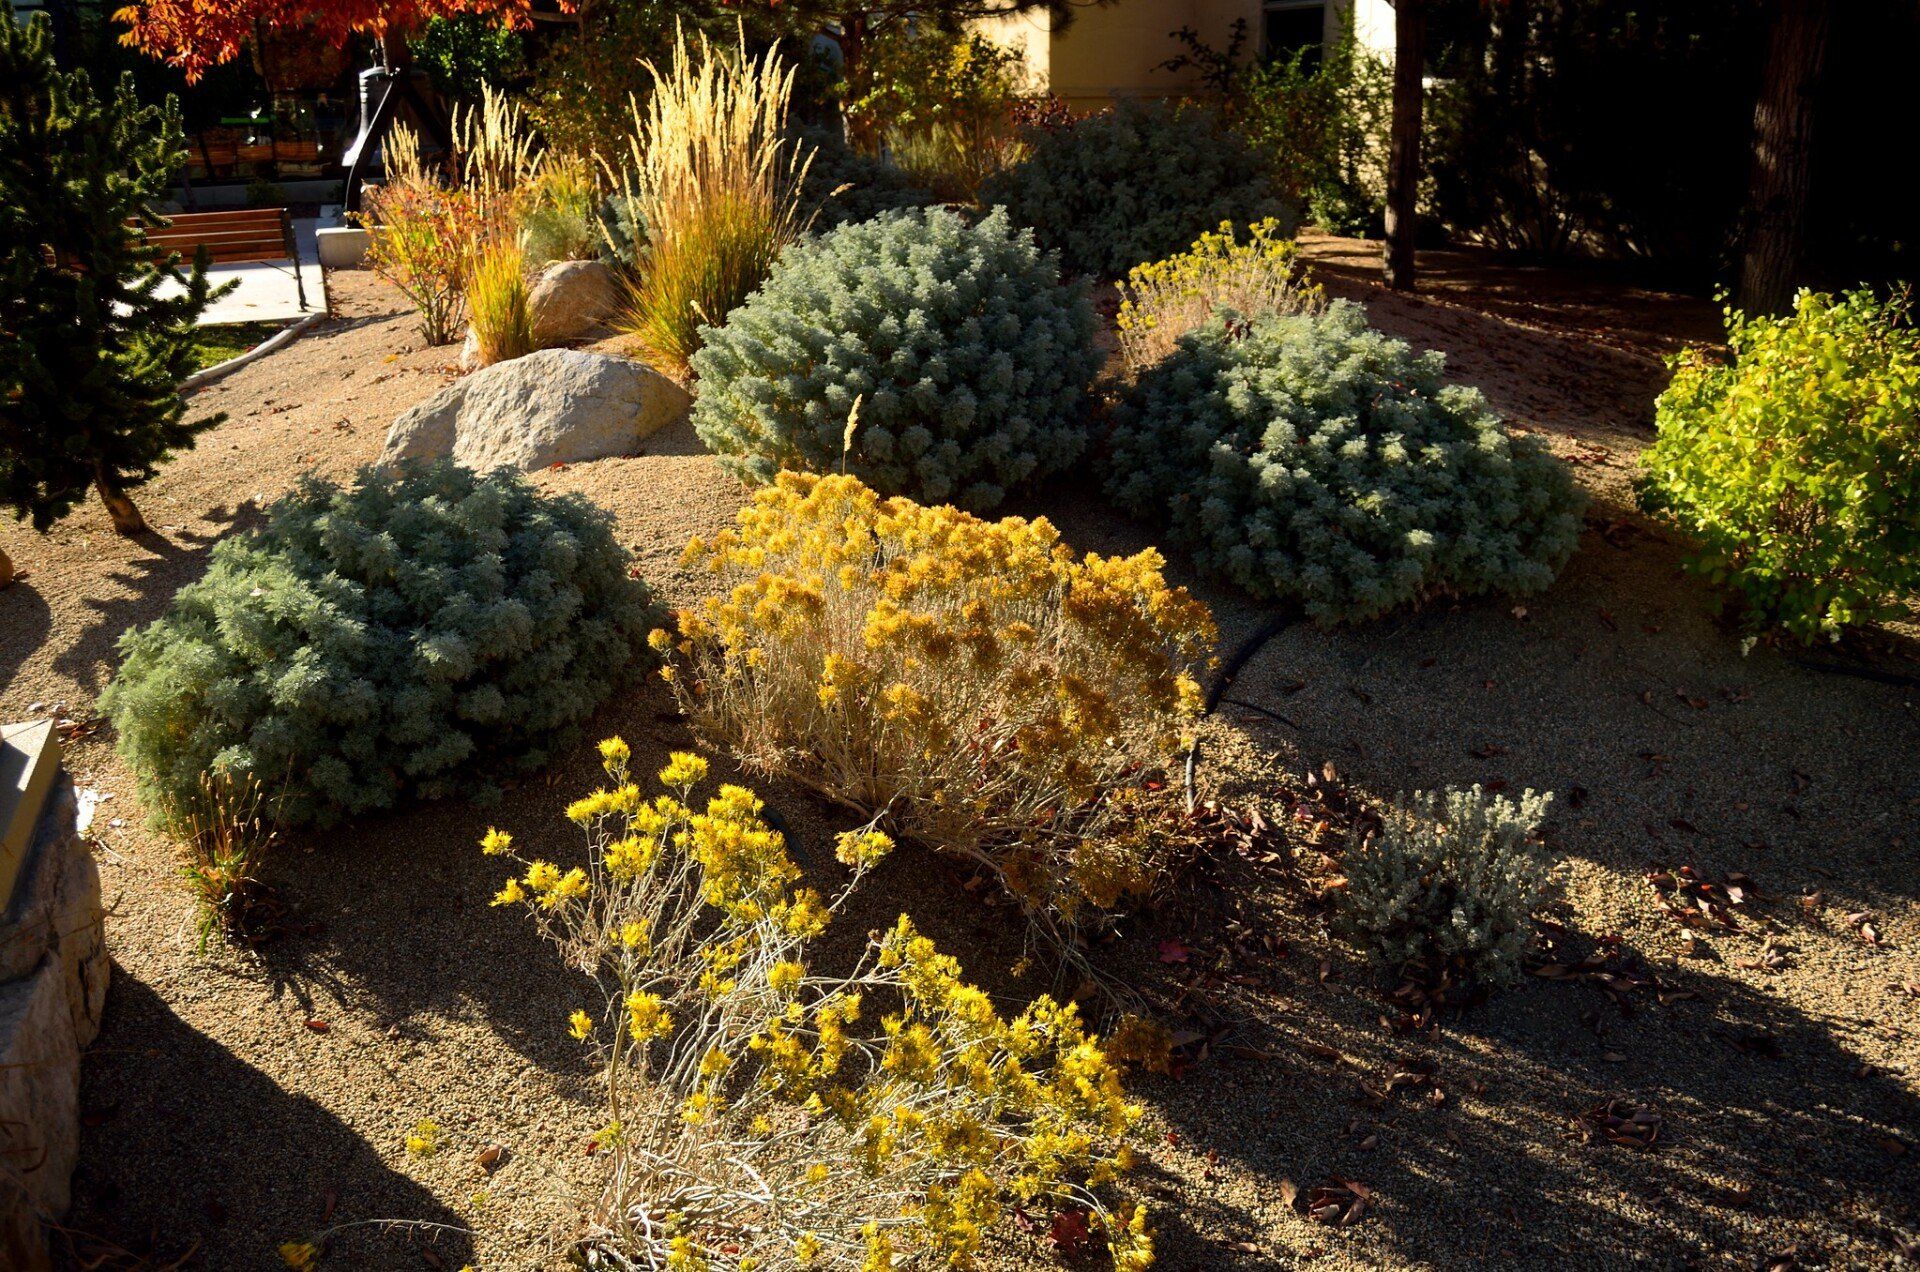 An eco-friendly xeriscape garden featuring a variety of drought-resistant plants and rocks.